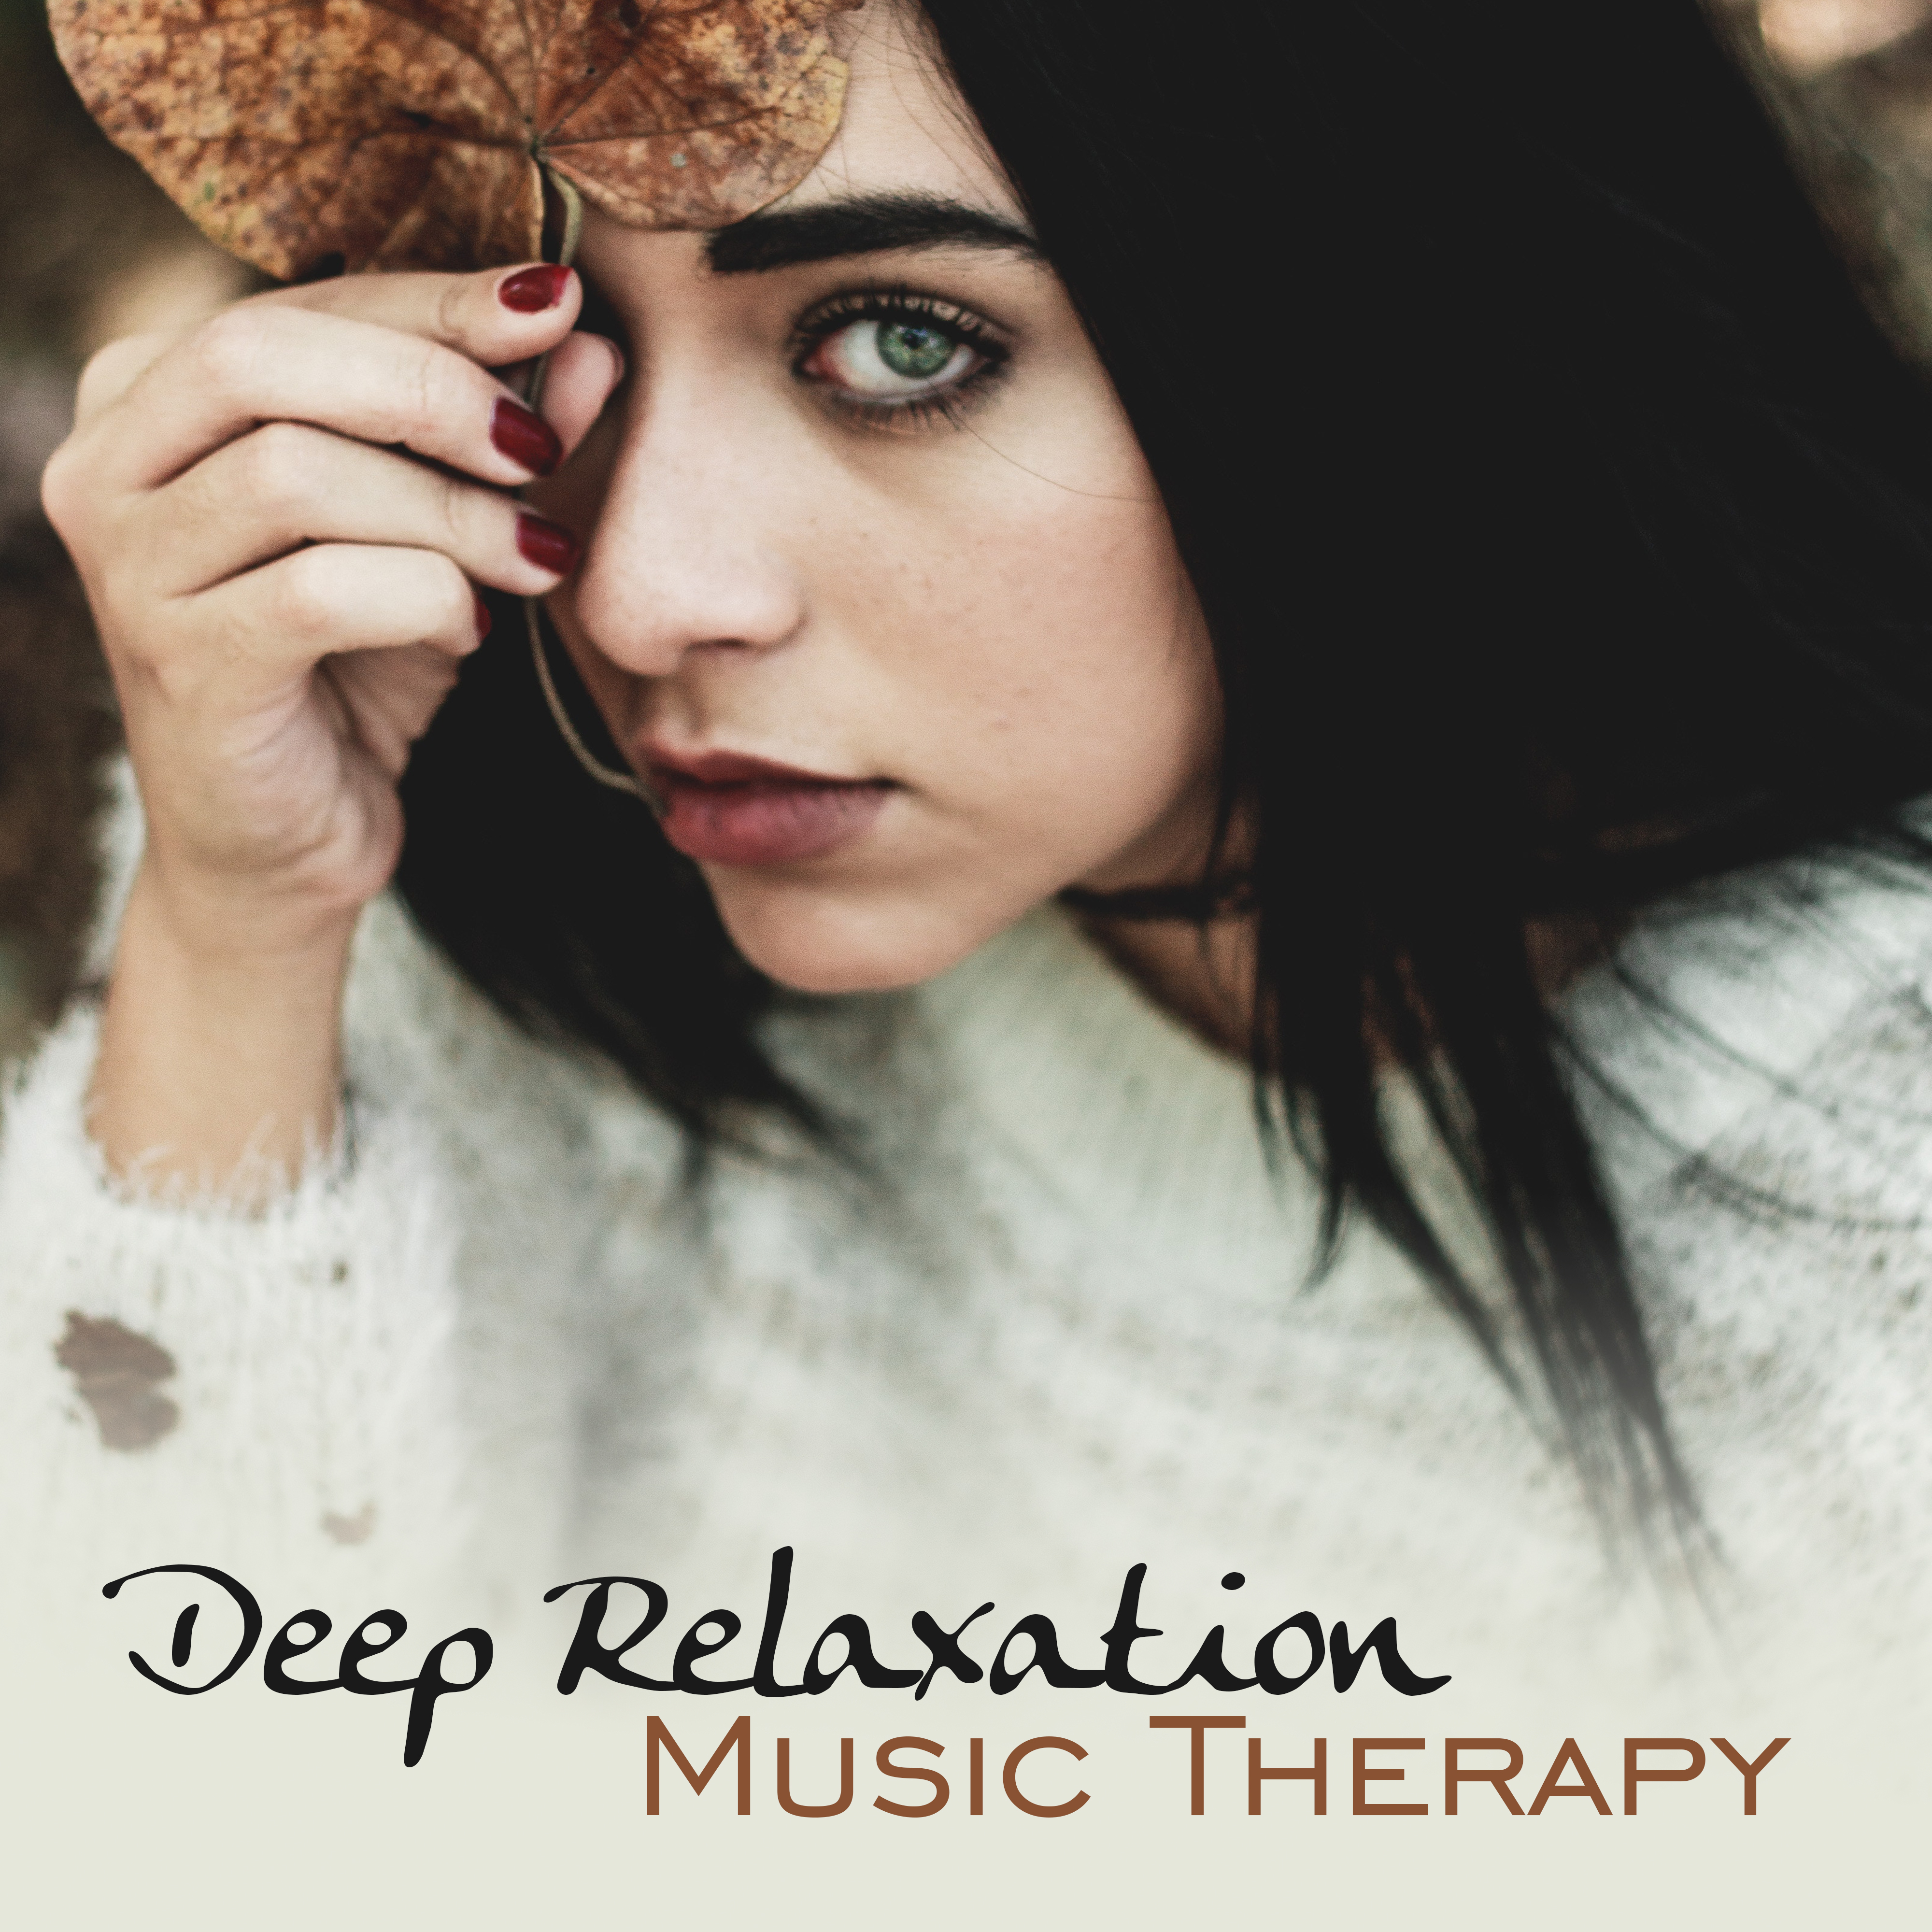 Deep Relaxation Music Therapy  Soft Sounds to Calm Down, Music to Rest, Healing Waves